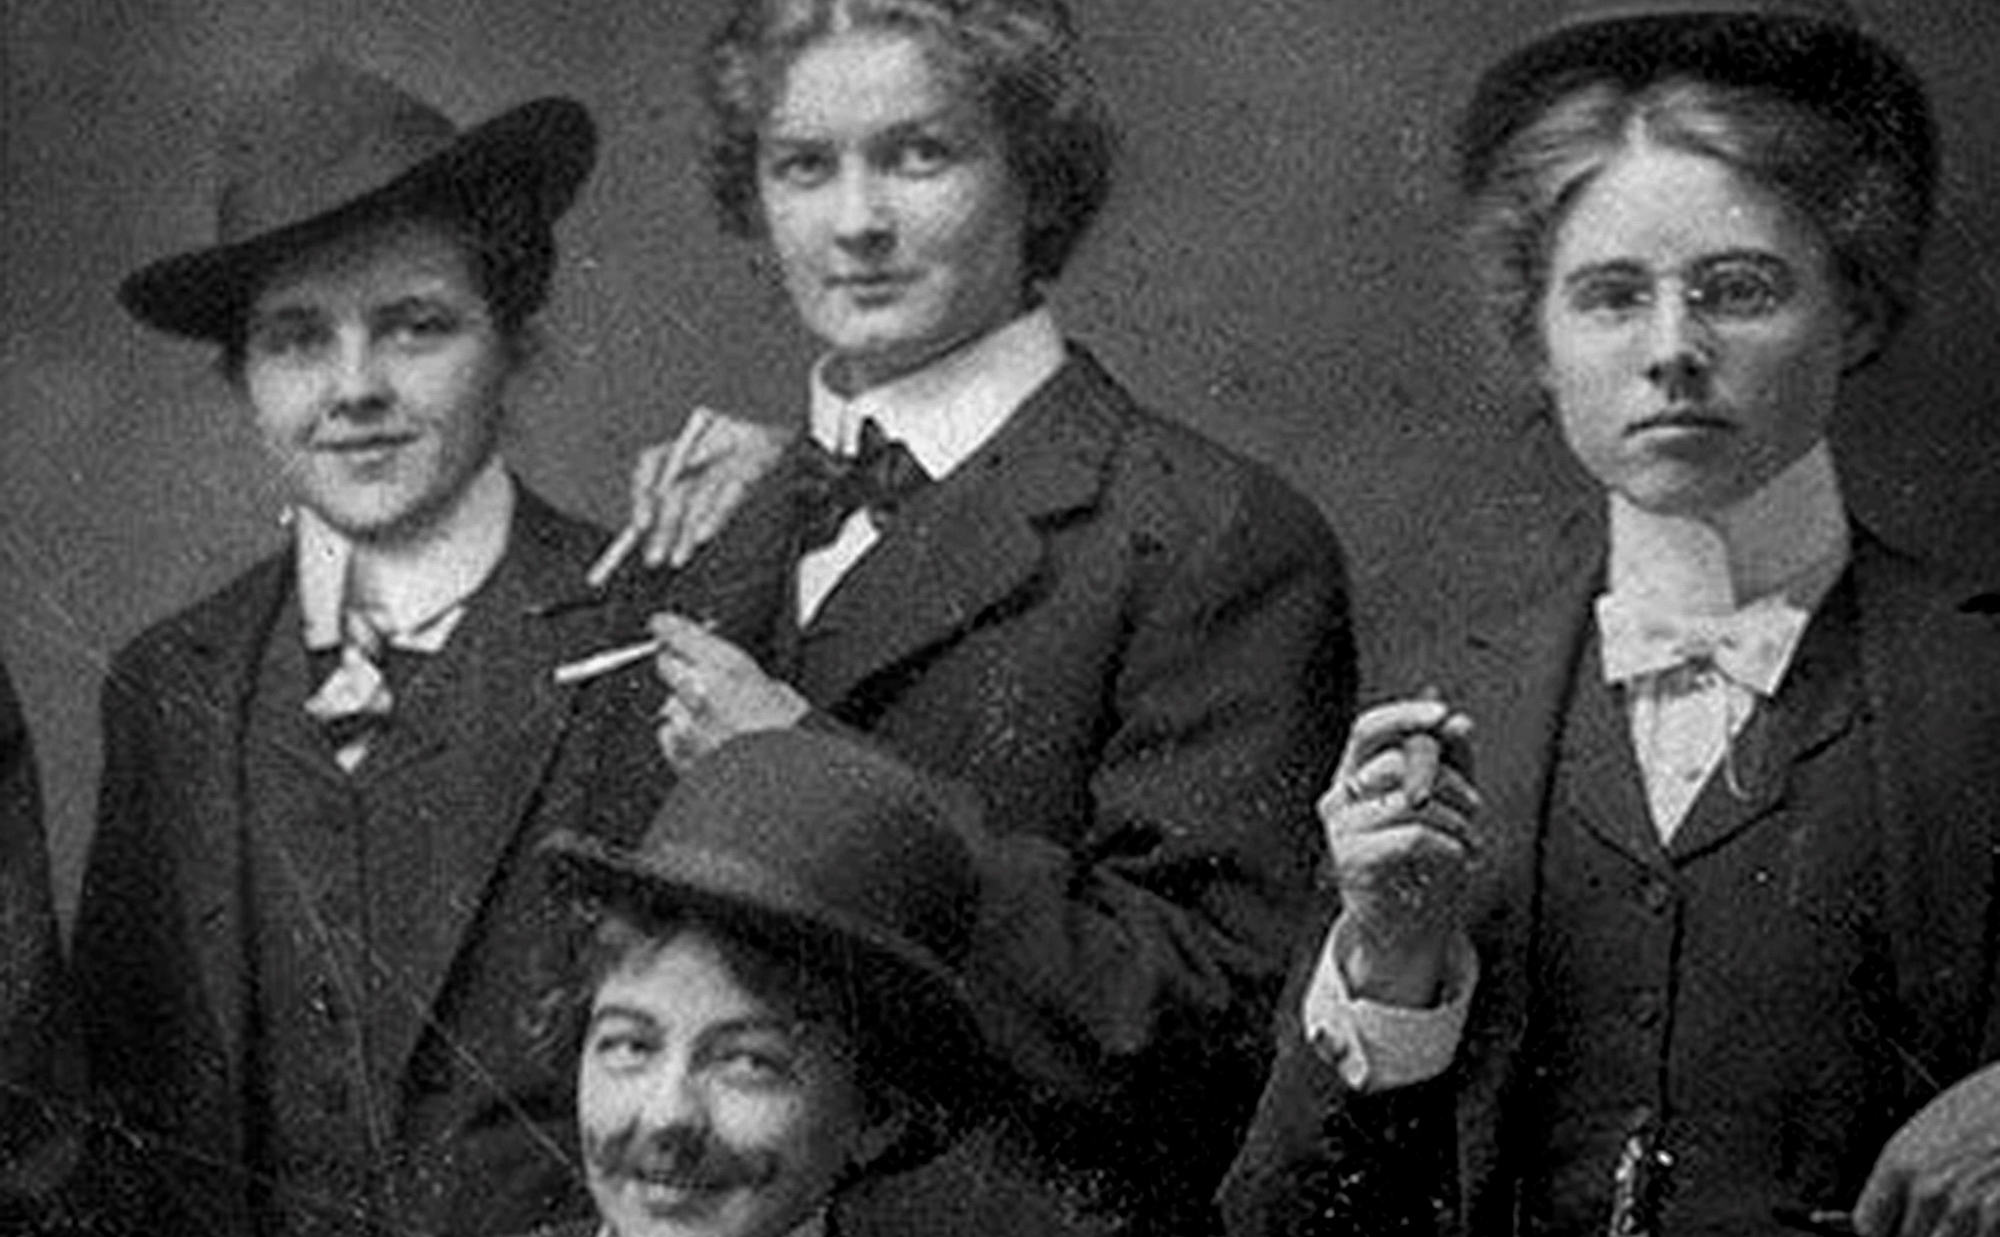 black and white photo of three 19th century women dressed as men in suits and ties